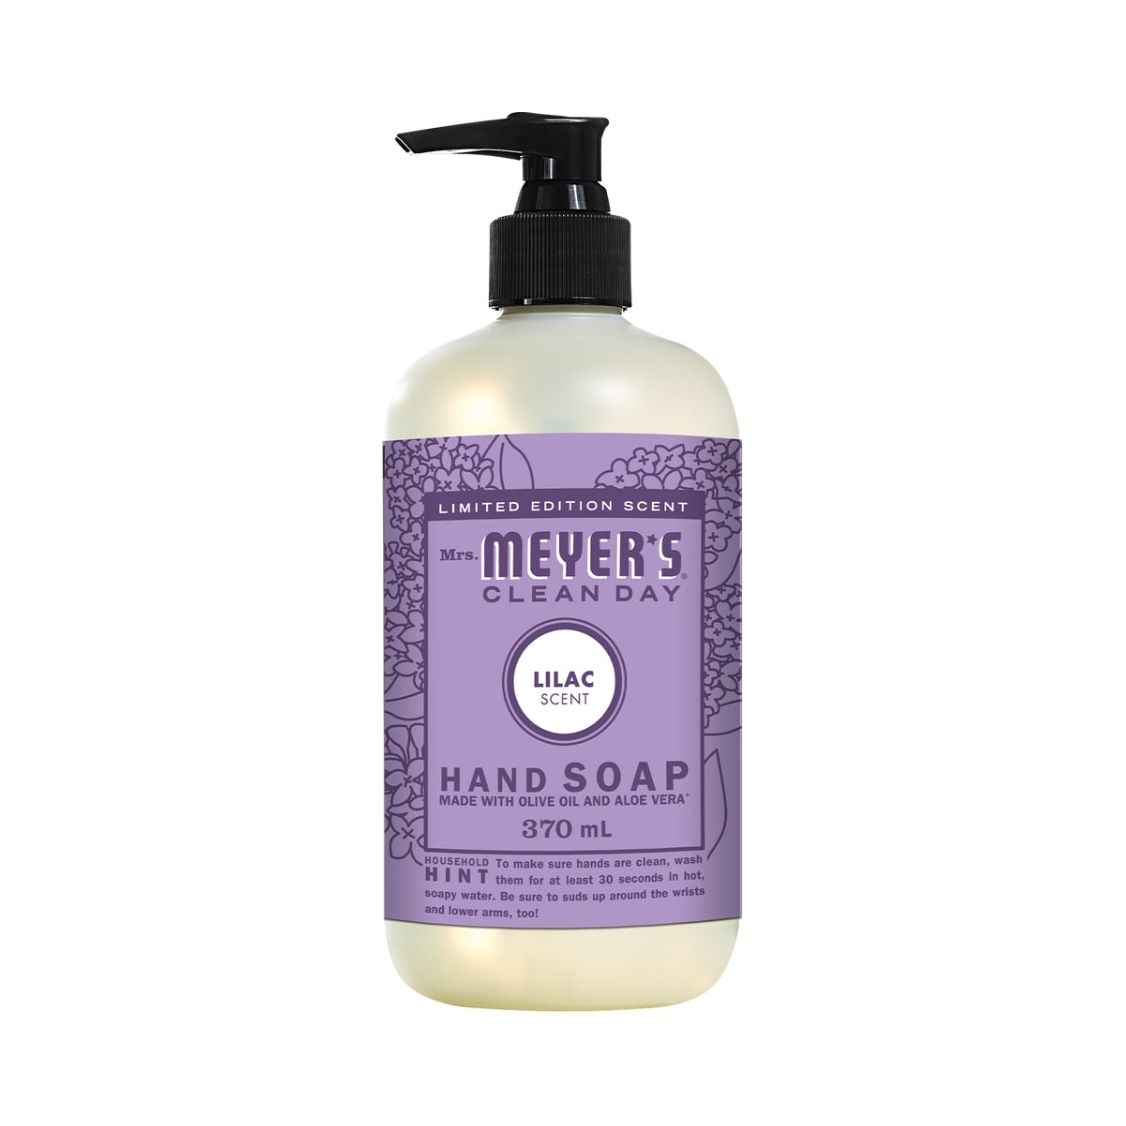 Mrs. Meyer's Hand Soap Lilac Scent 473ml